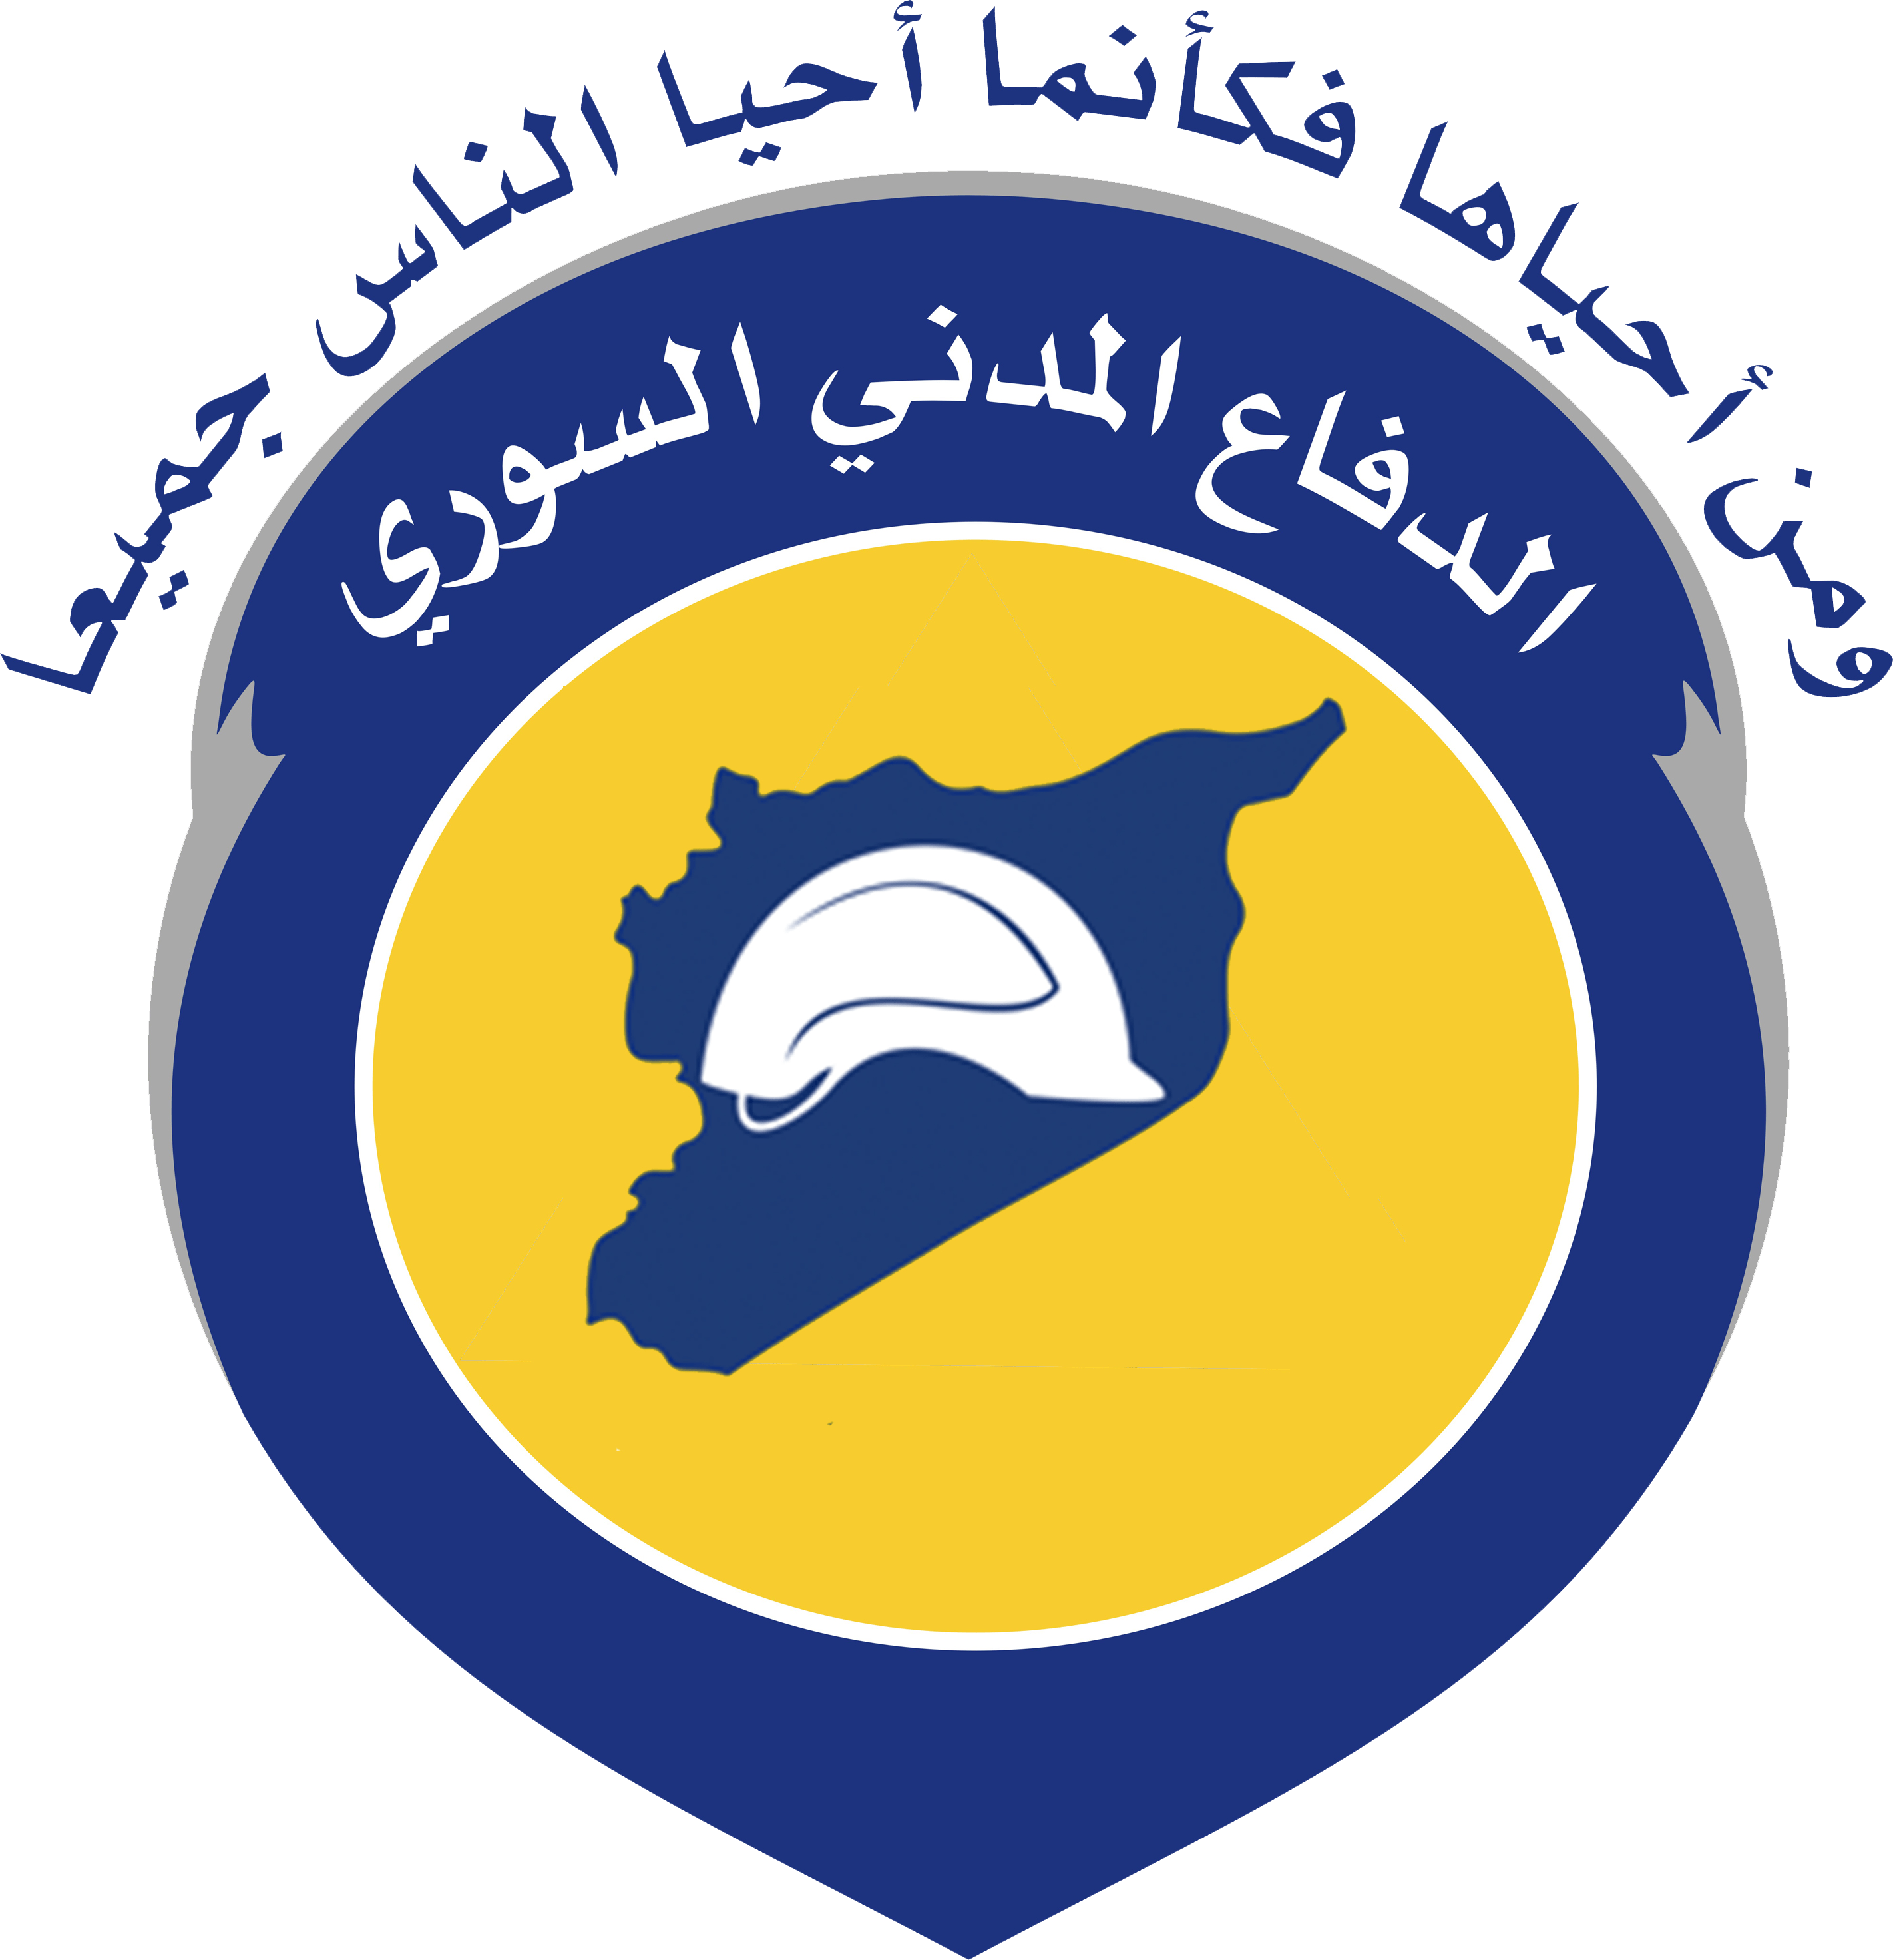 Search and Rescue Medical Cross Logo - White Helmets (Syrian Civil War)